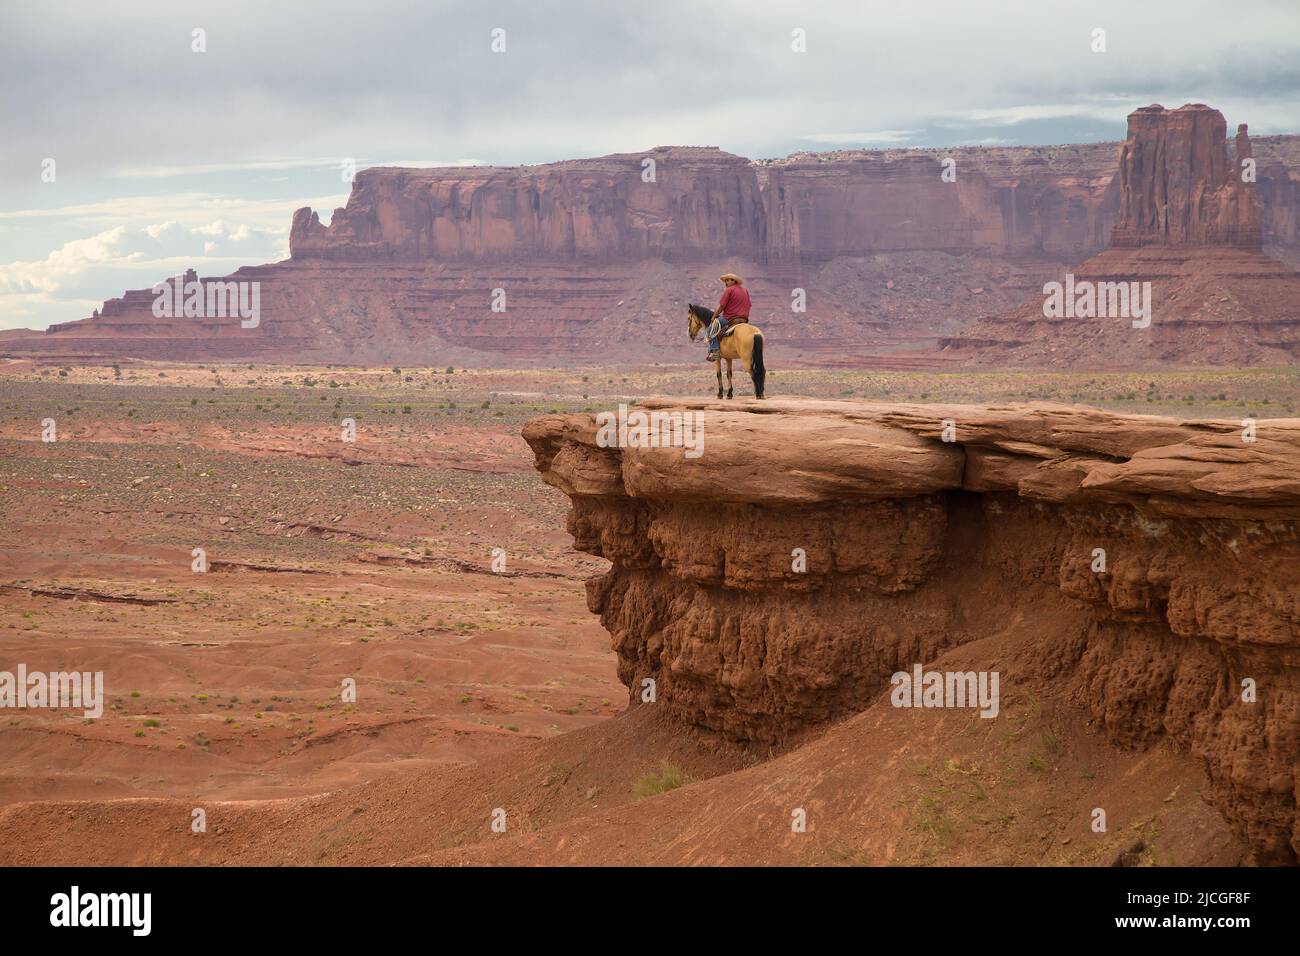 Oljato-Monument Valley, Arizona - September 4, 2019: Man on a Horse at John Ford Point in Monument Valley, Arizona, United States. Stock Photo